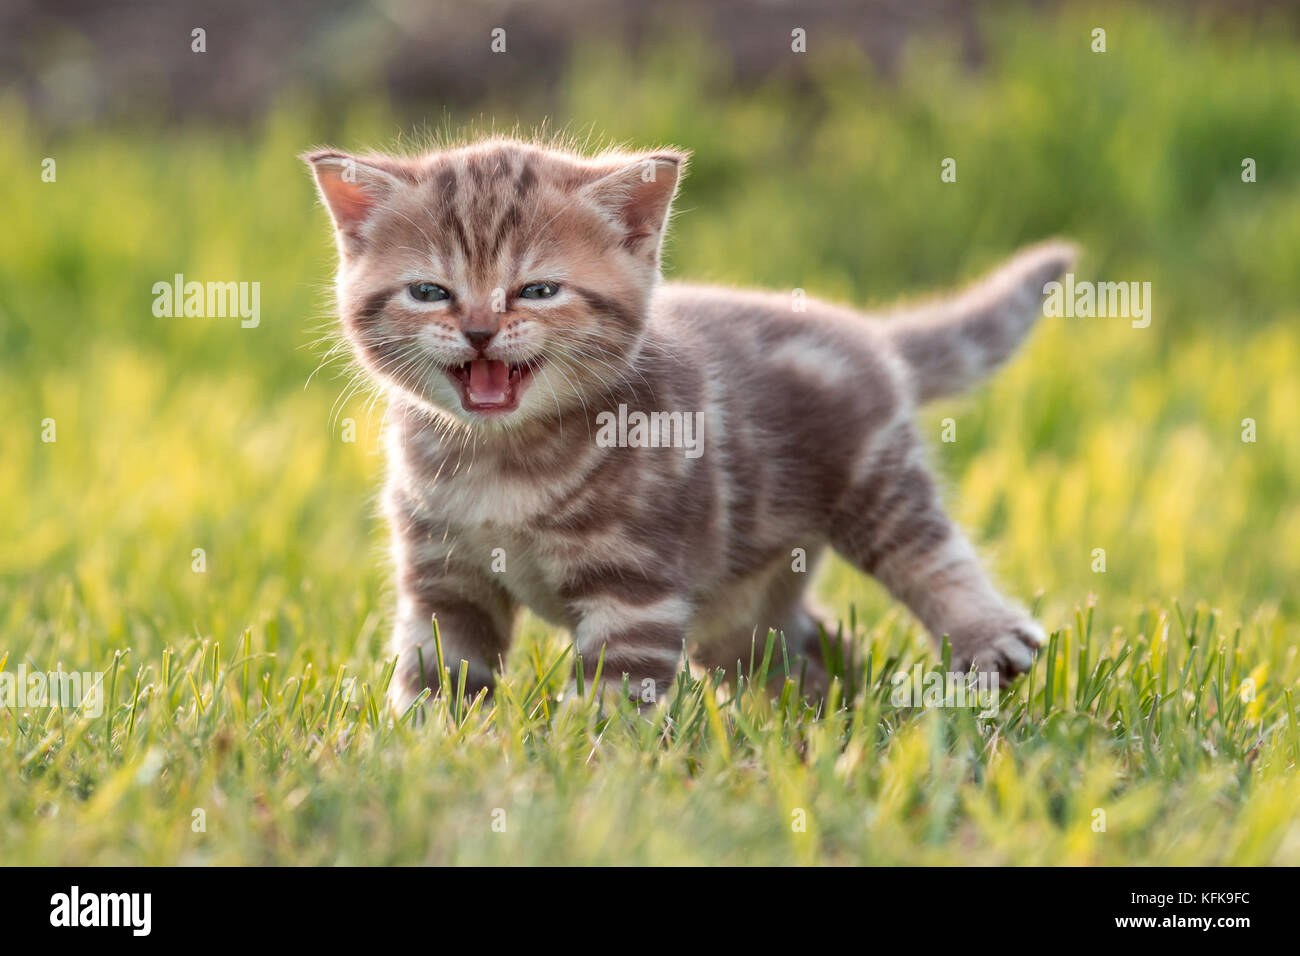 Young cute cat meowing in grass Stock Photo